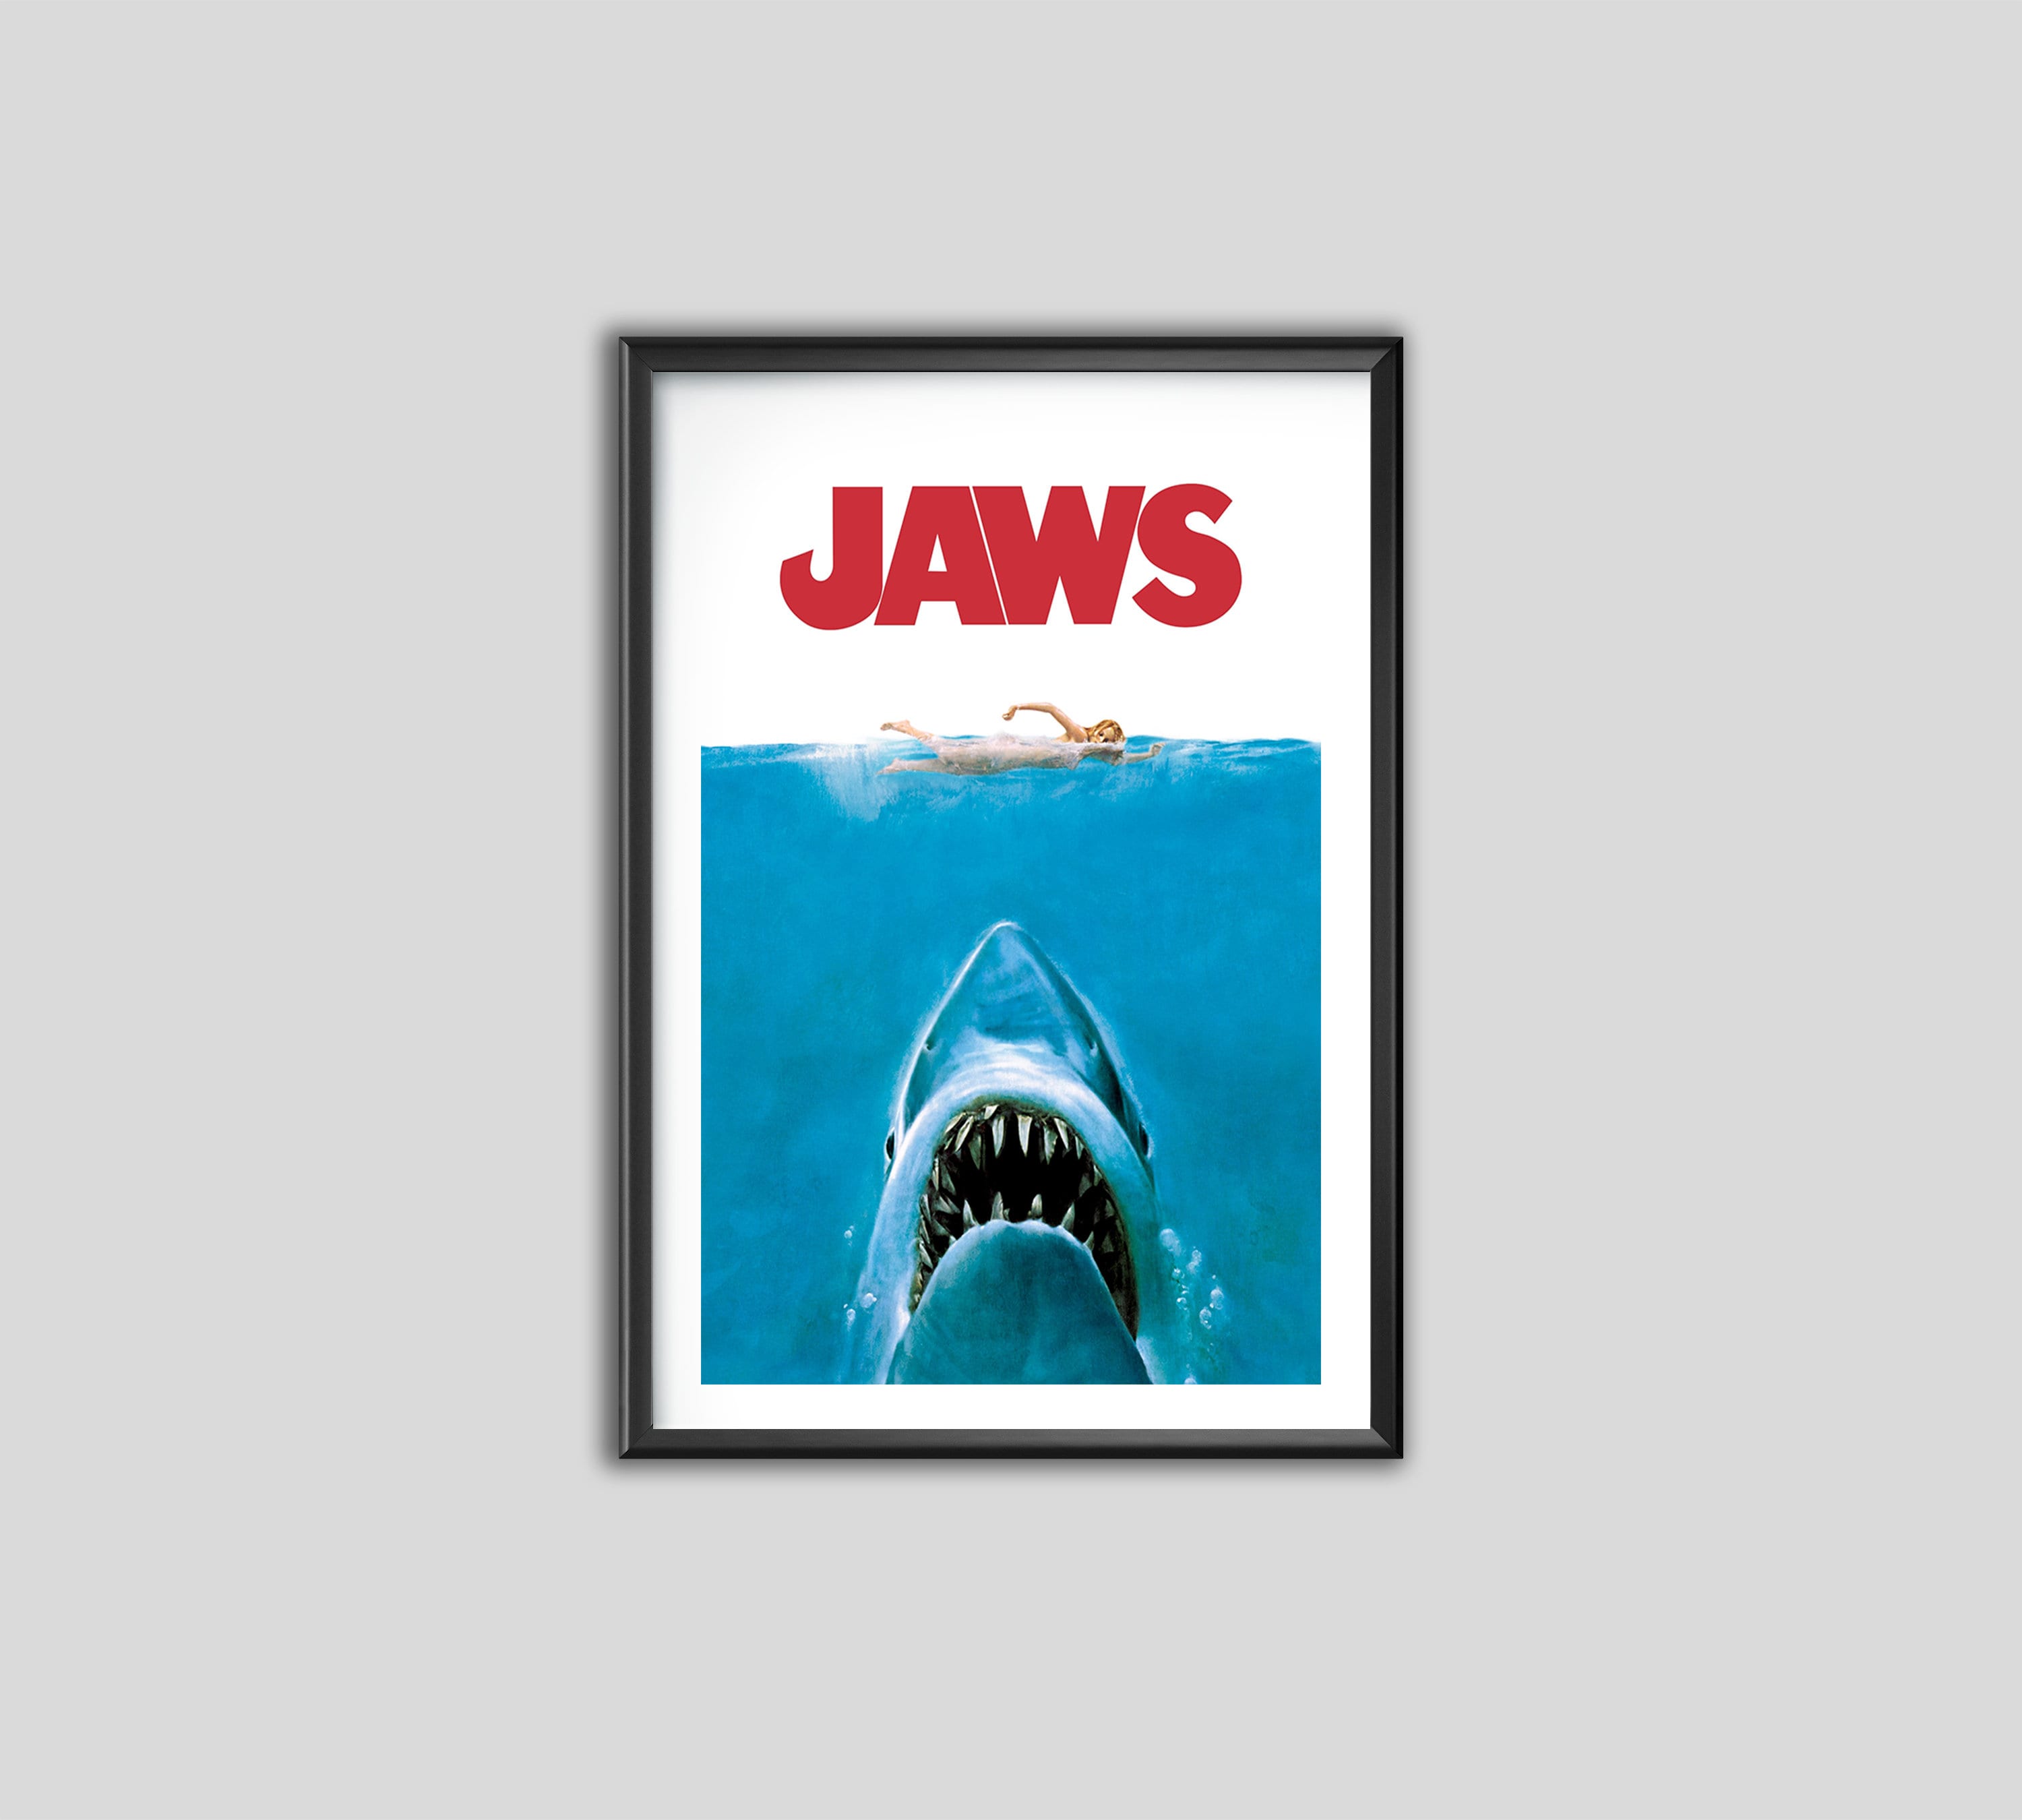 Discover Jaws Poster, Wall Art, Wall Decor, Home Decor, Movie Poster for Gift